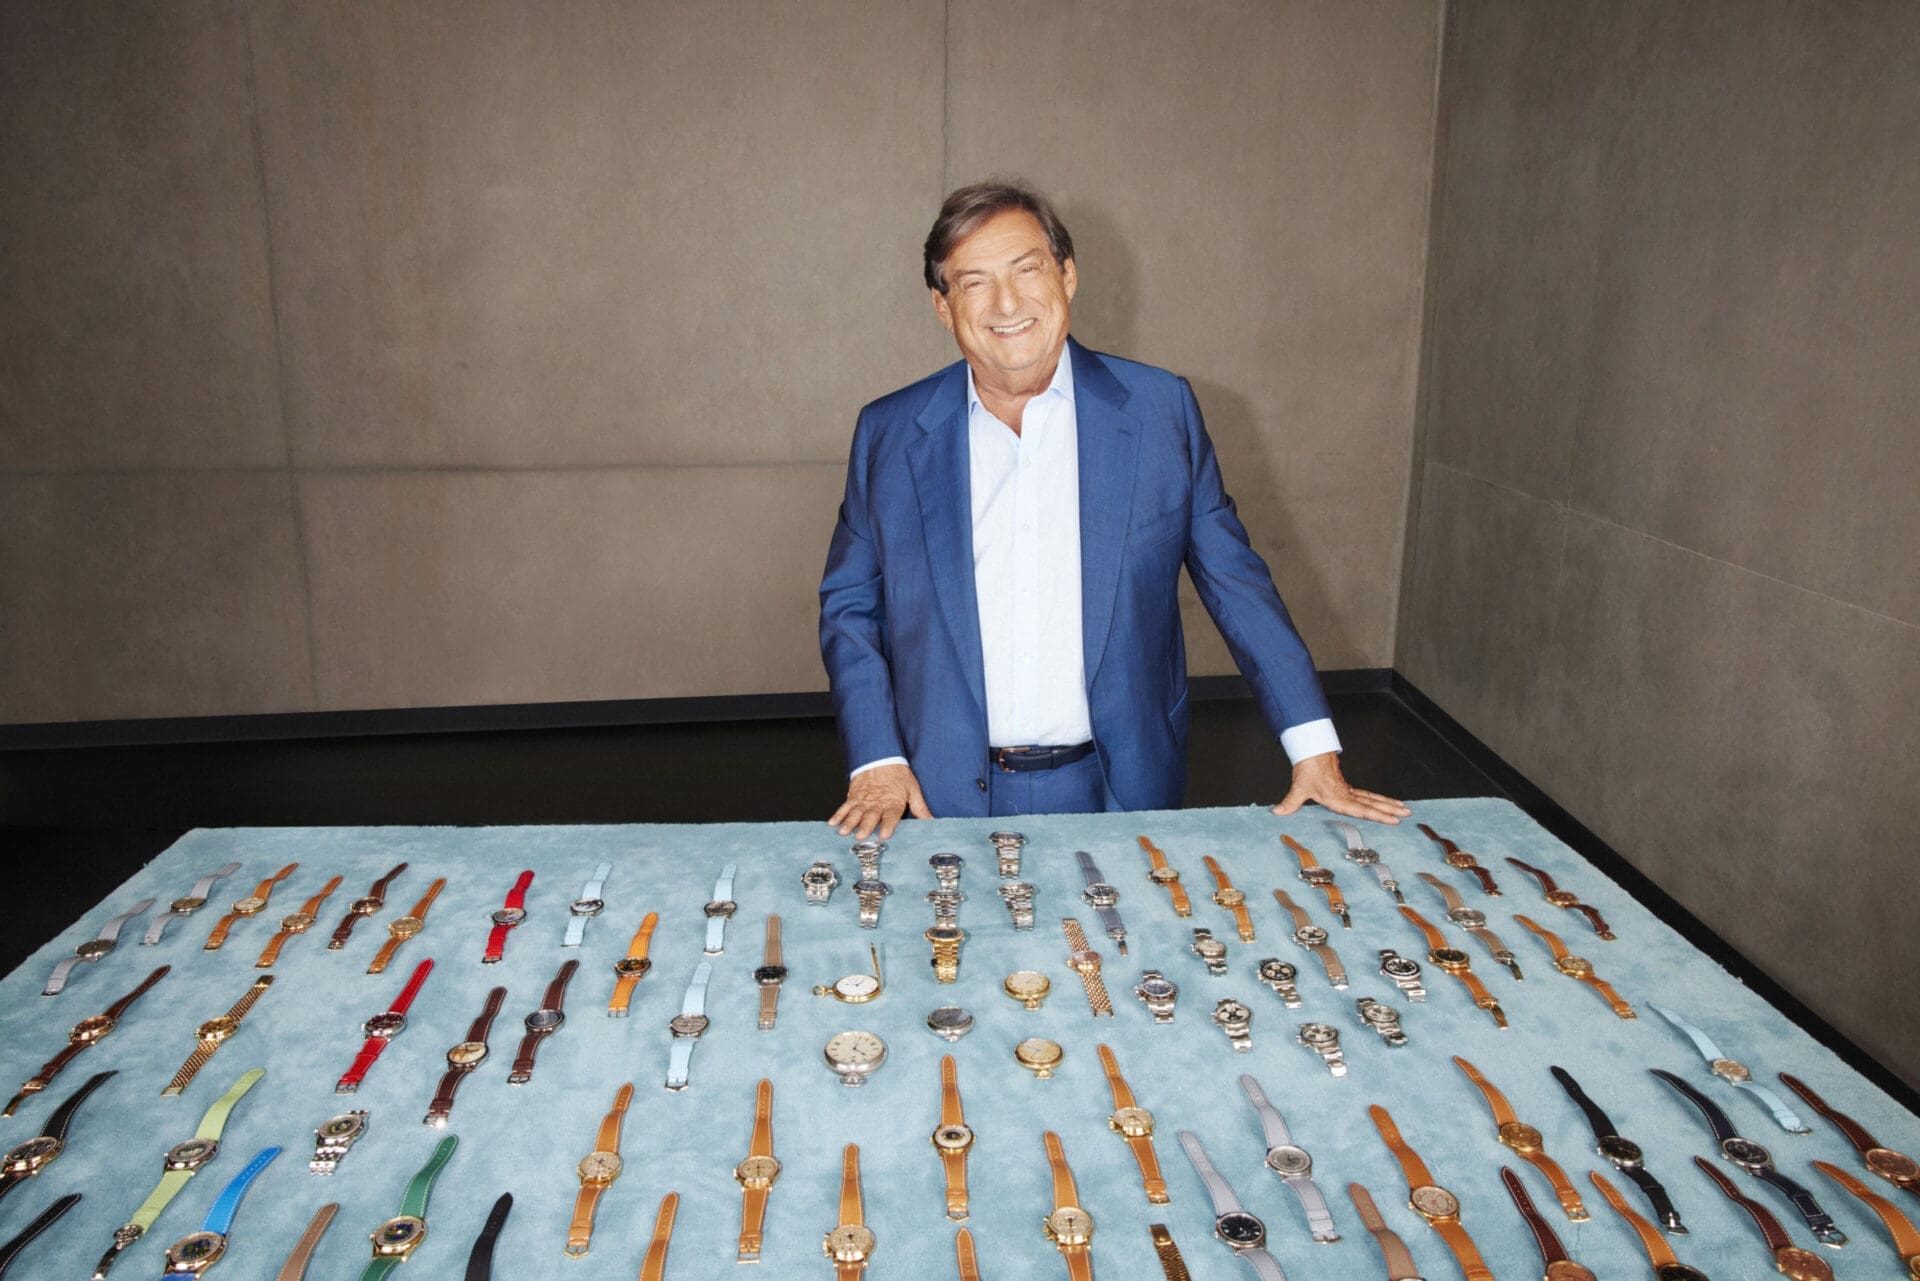 Ten things I learned from super-collector Patrick Getreide – the man behind the OAK Collection